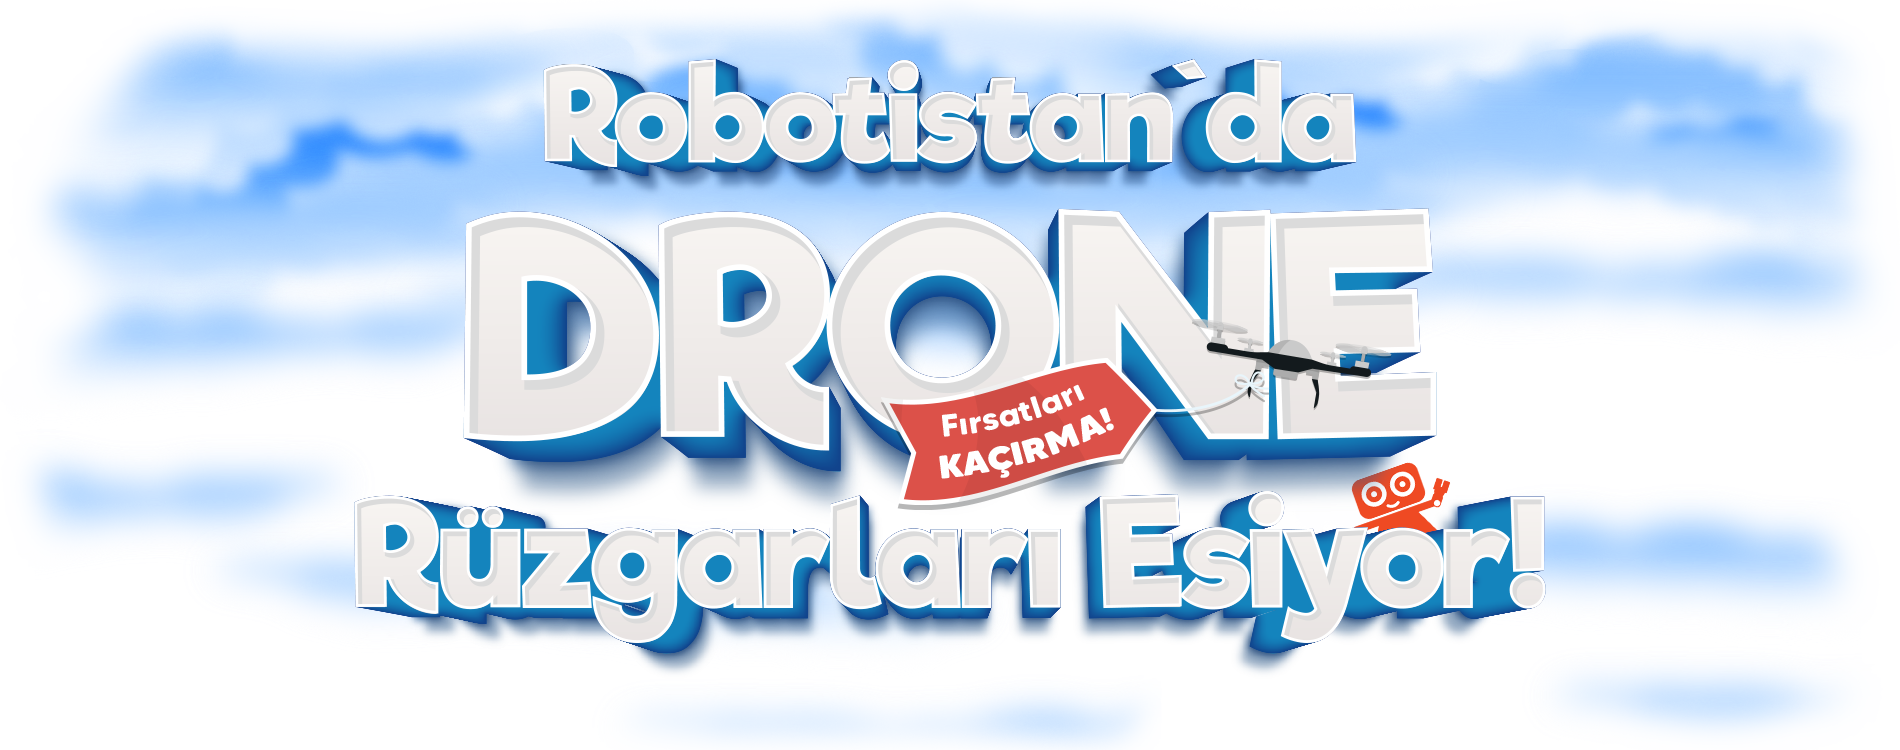 dronee.png (1.17 MB)